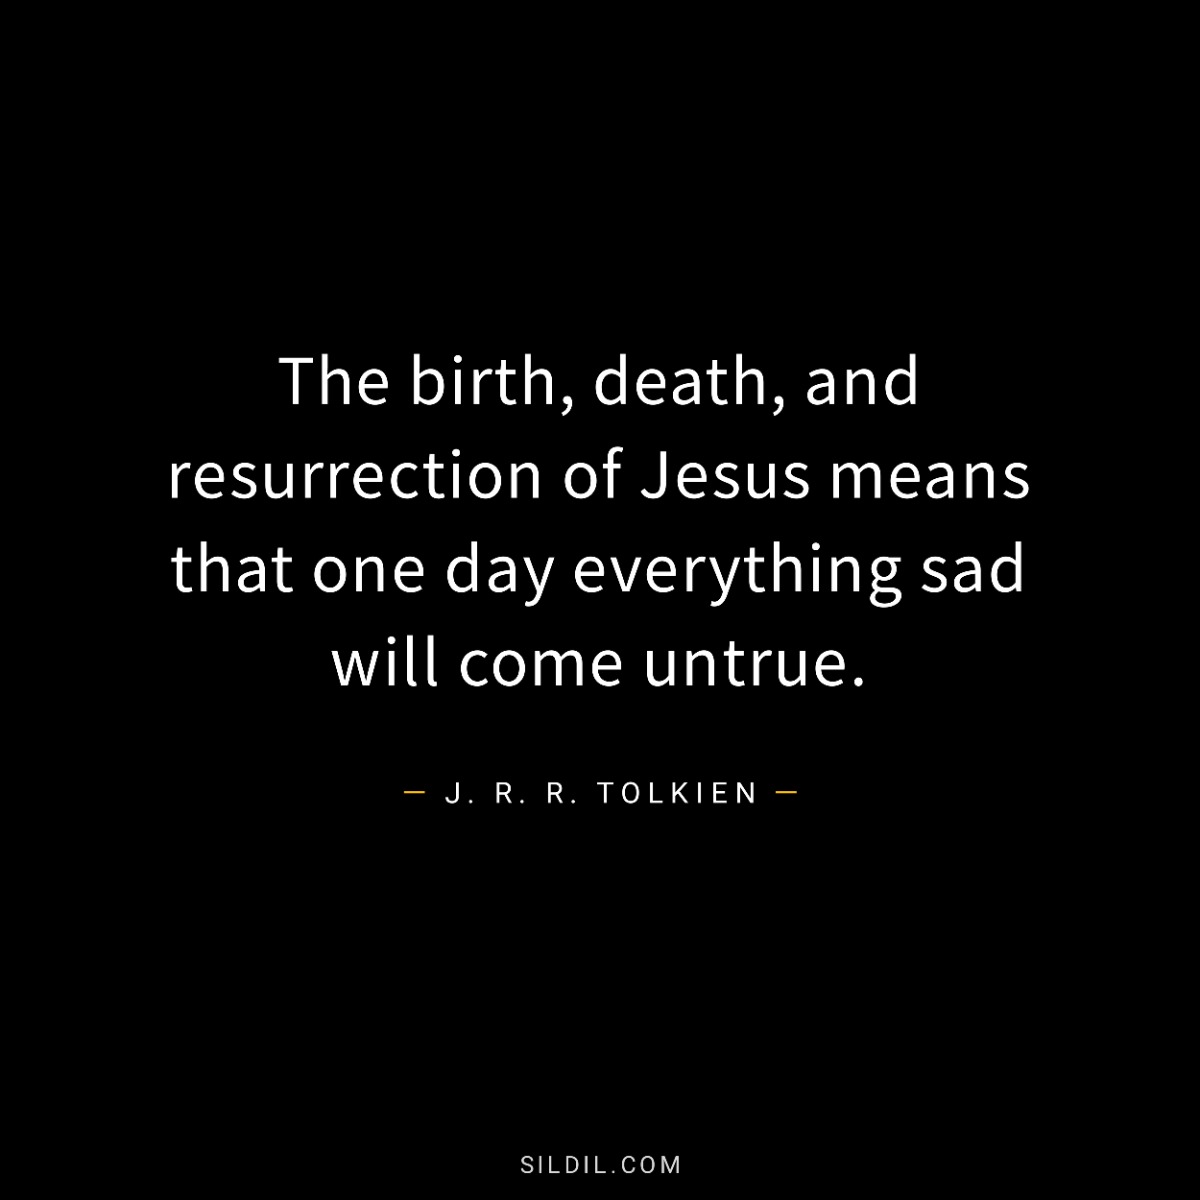 The birth, death, and resurrection of Jesus means that one day everything sad will come untrue.